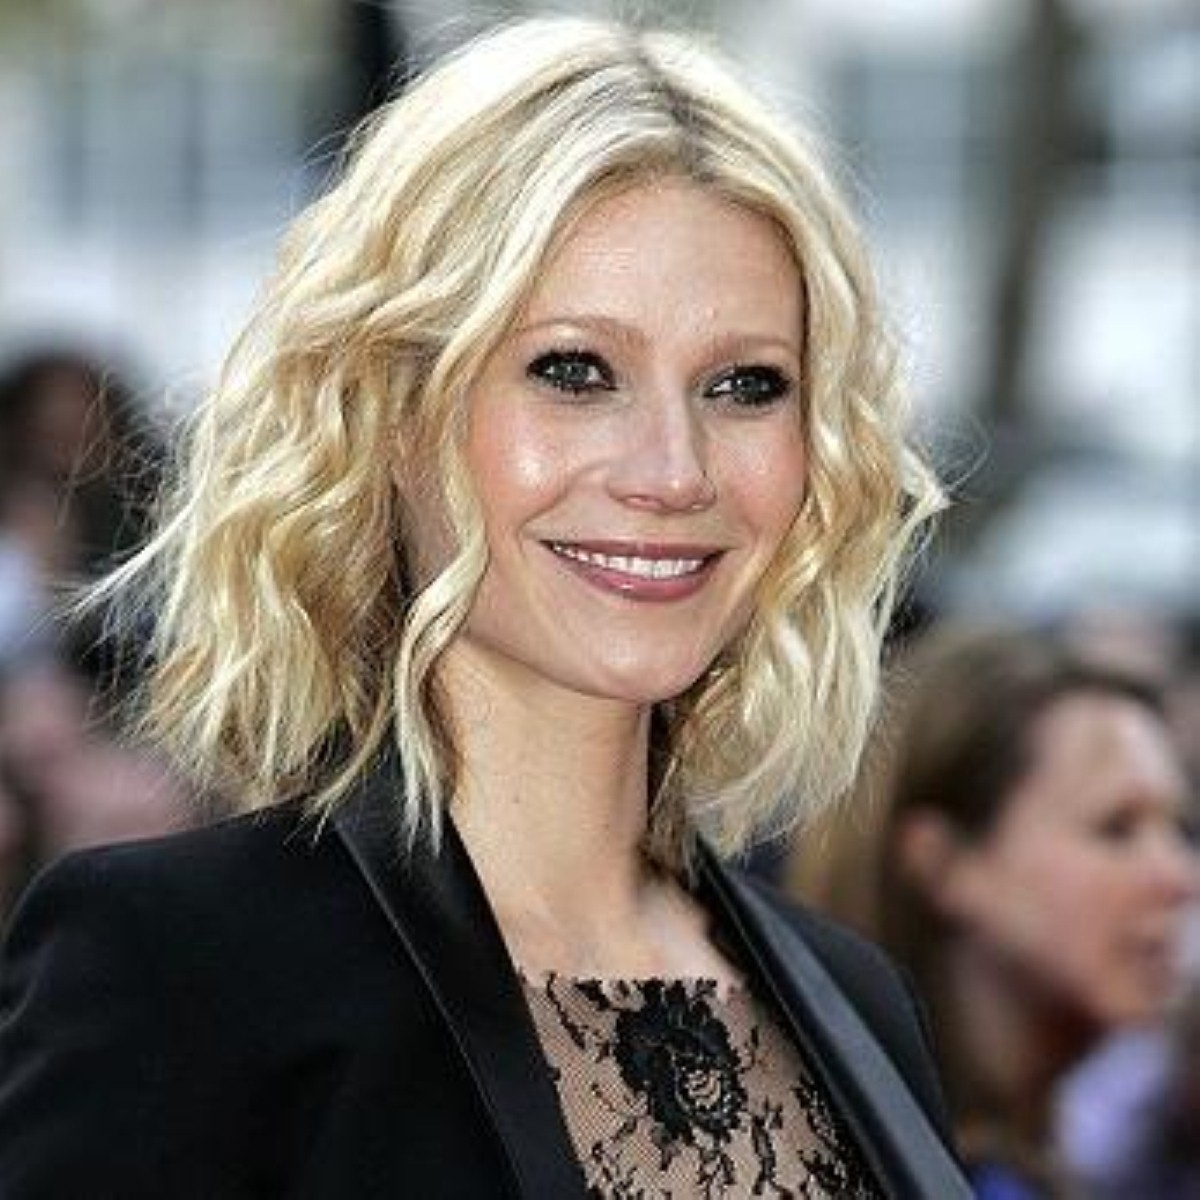 Gwyneth Paltrow has two children with her rock-star husband Chris Martin, of Coldplay fame